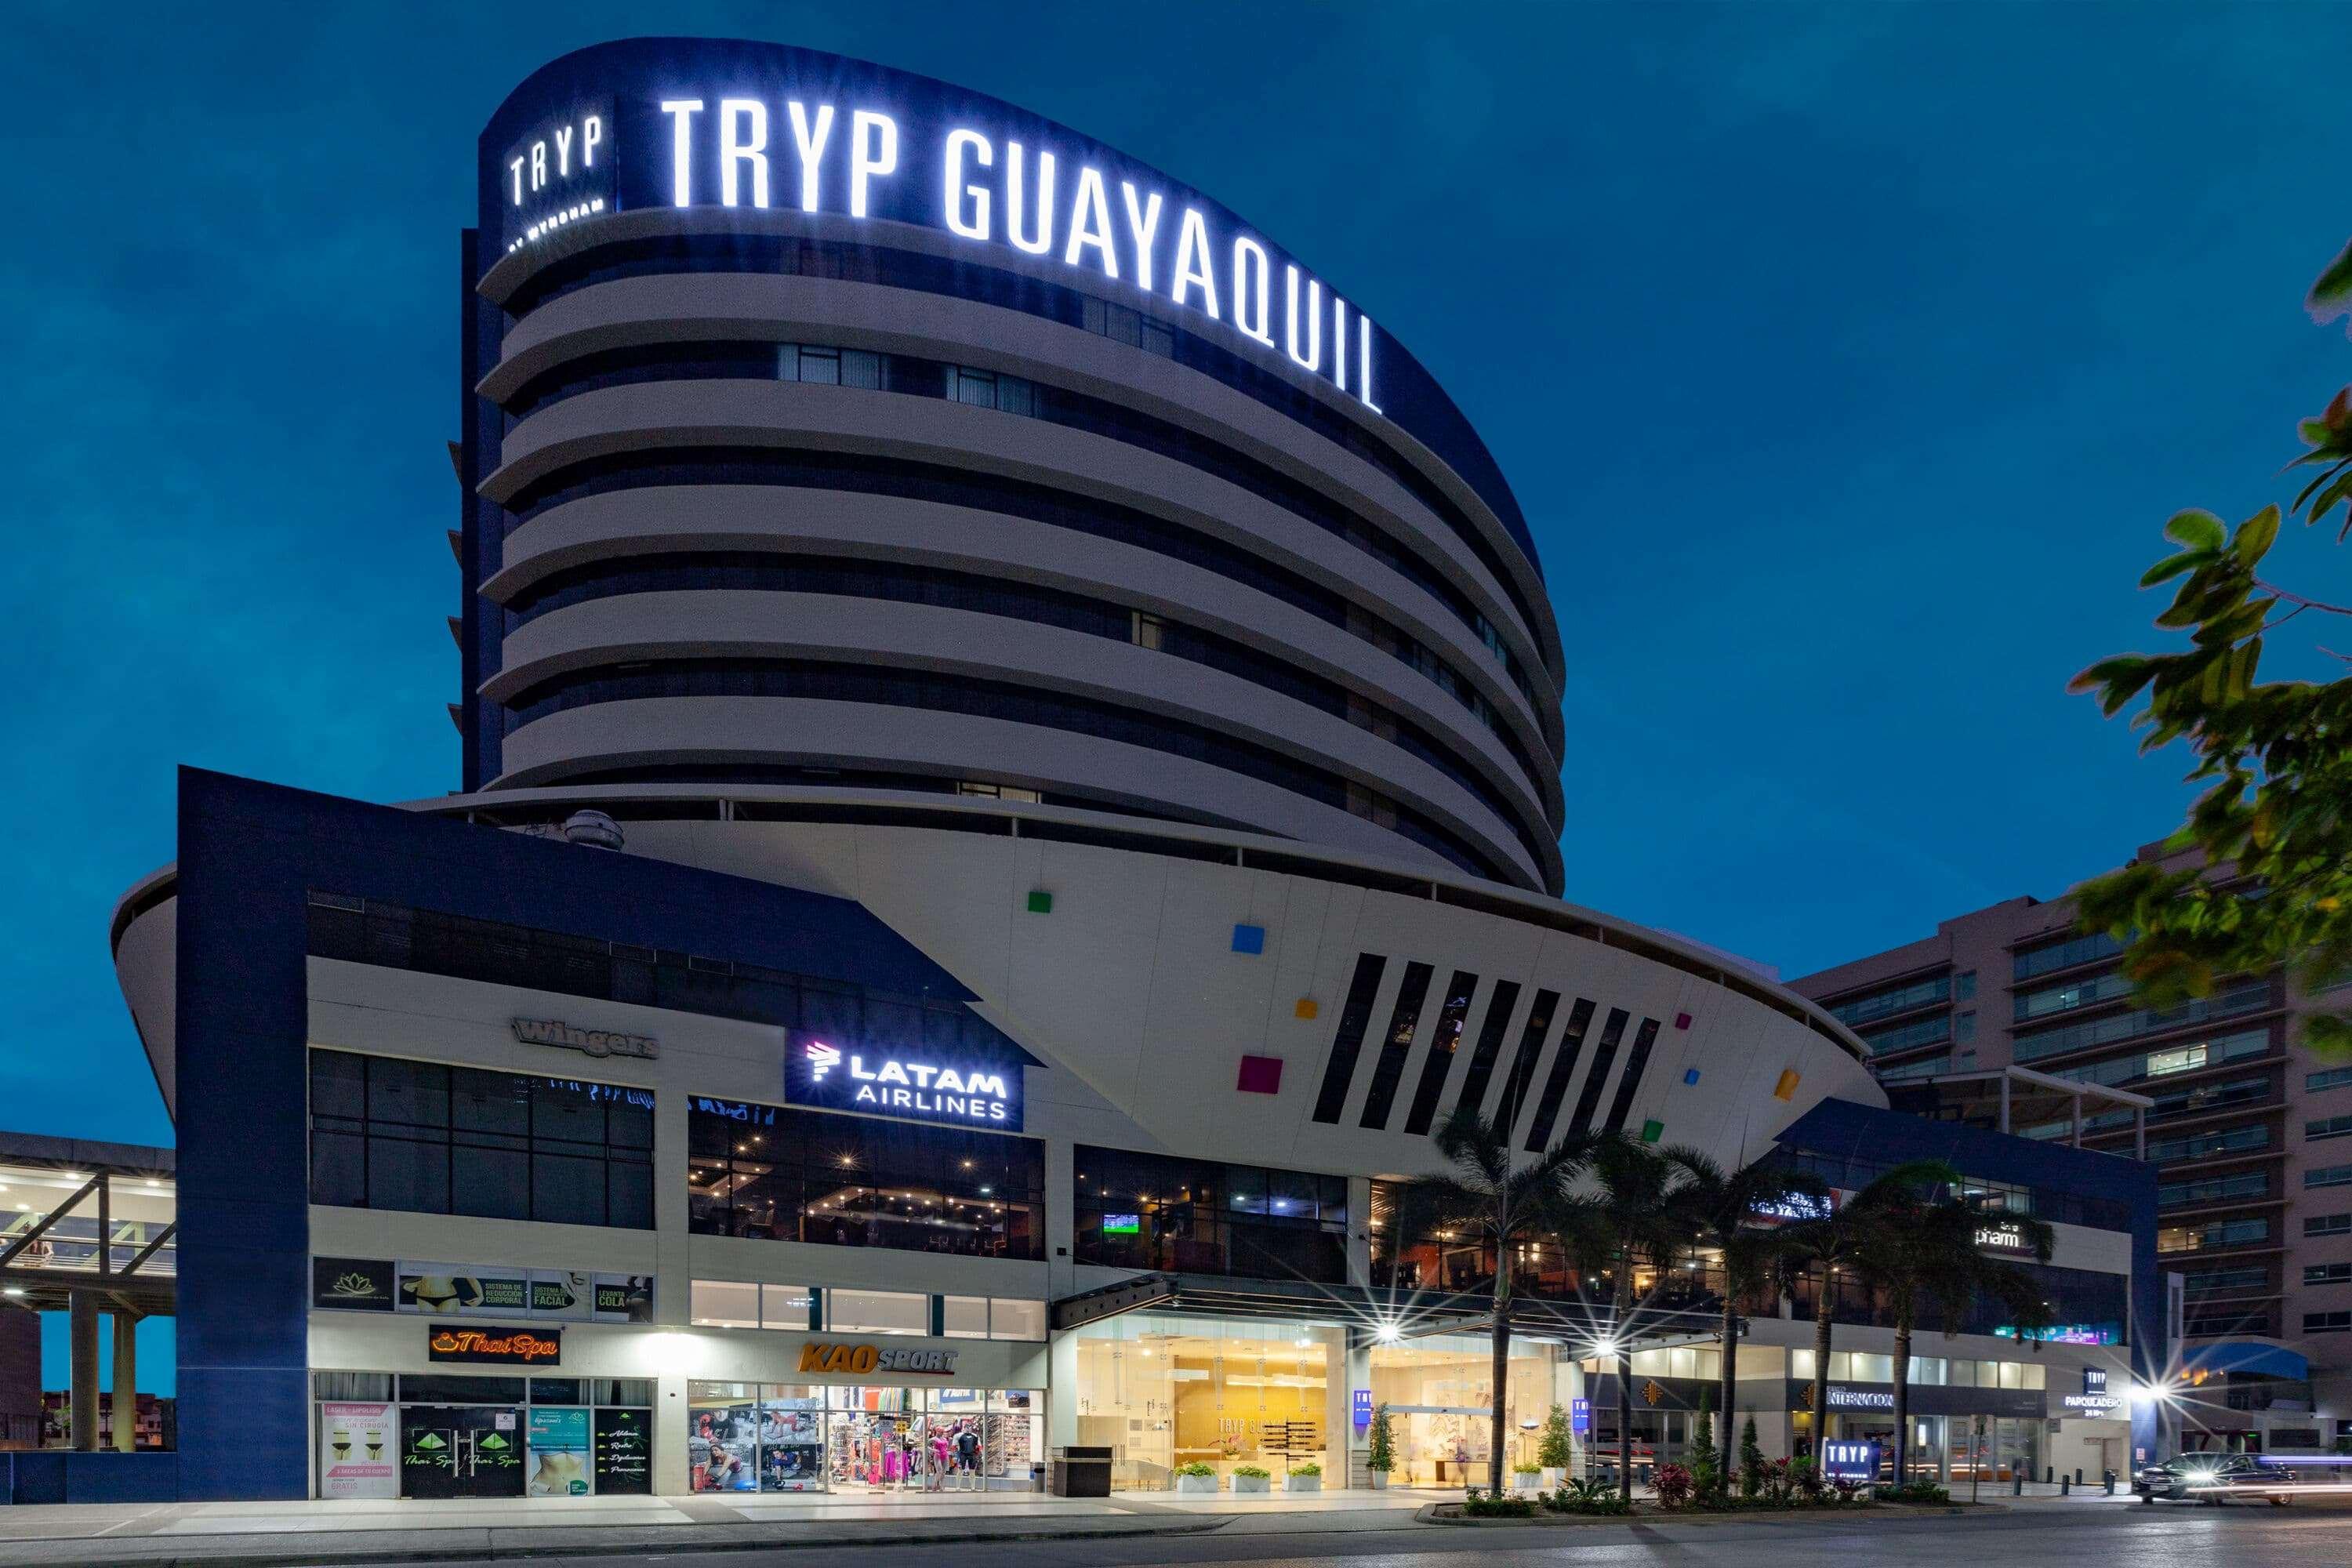 Tryp By Wyndham Guayaquil Hotel Buitenkant foto